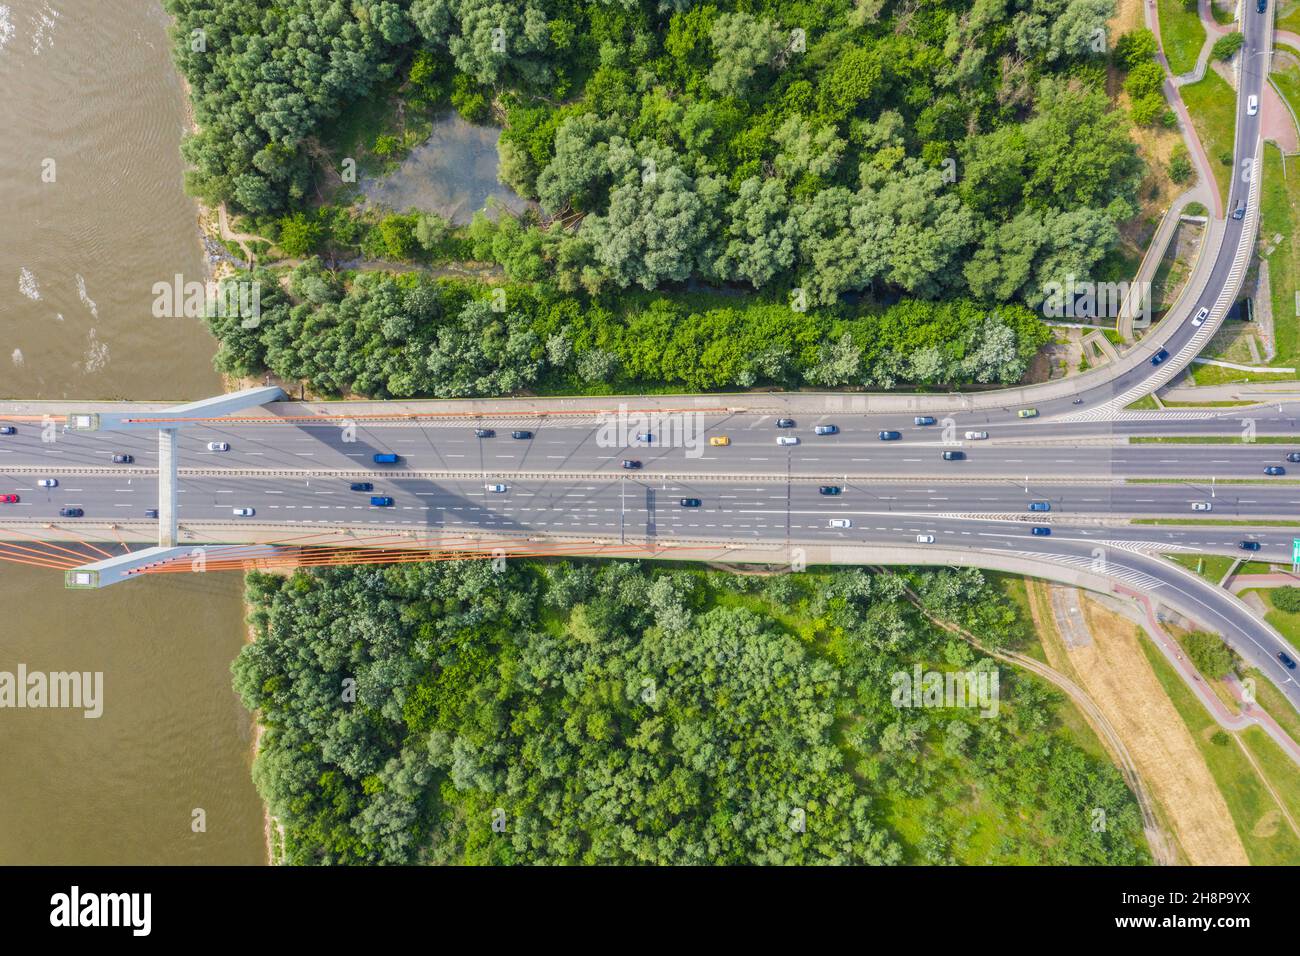 Car driving on highway bridge and road intersection in modern city aerial view Stock Photo